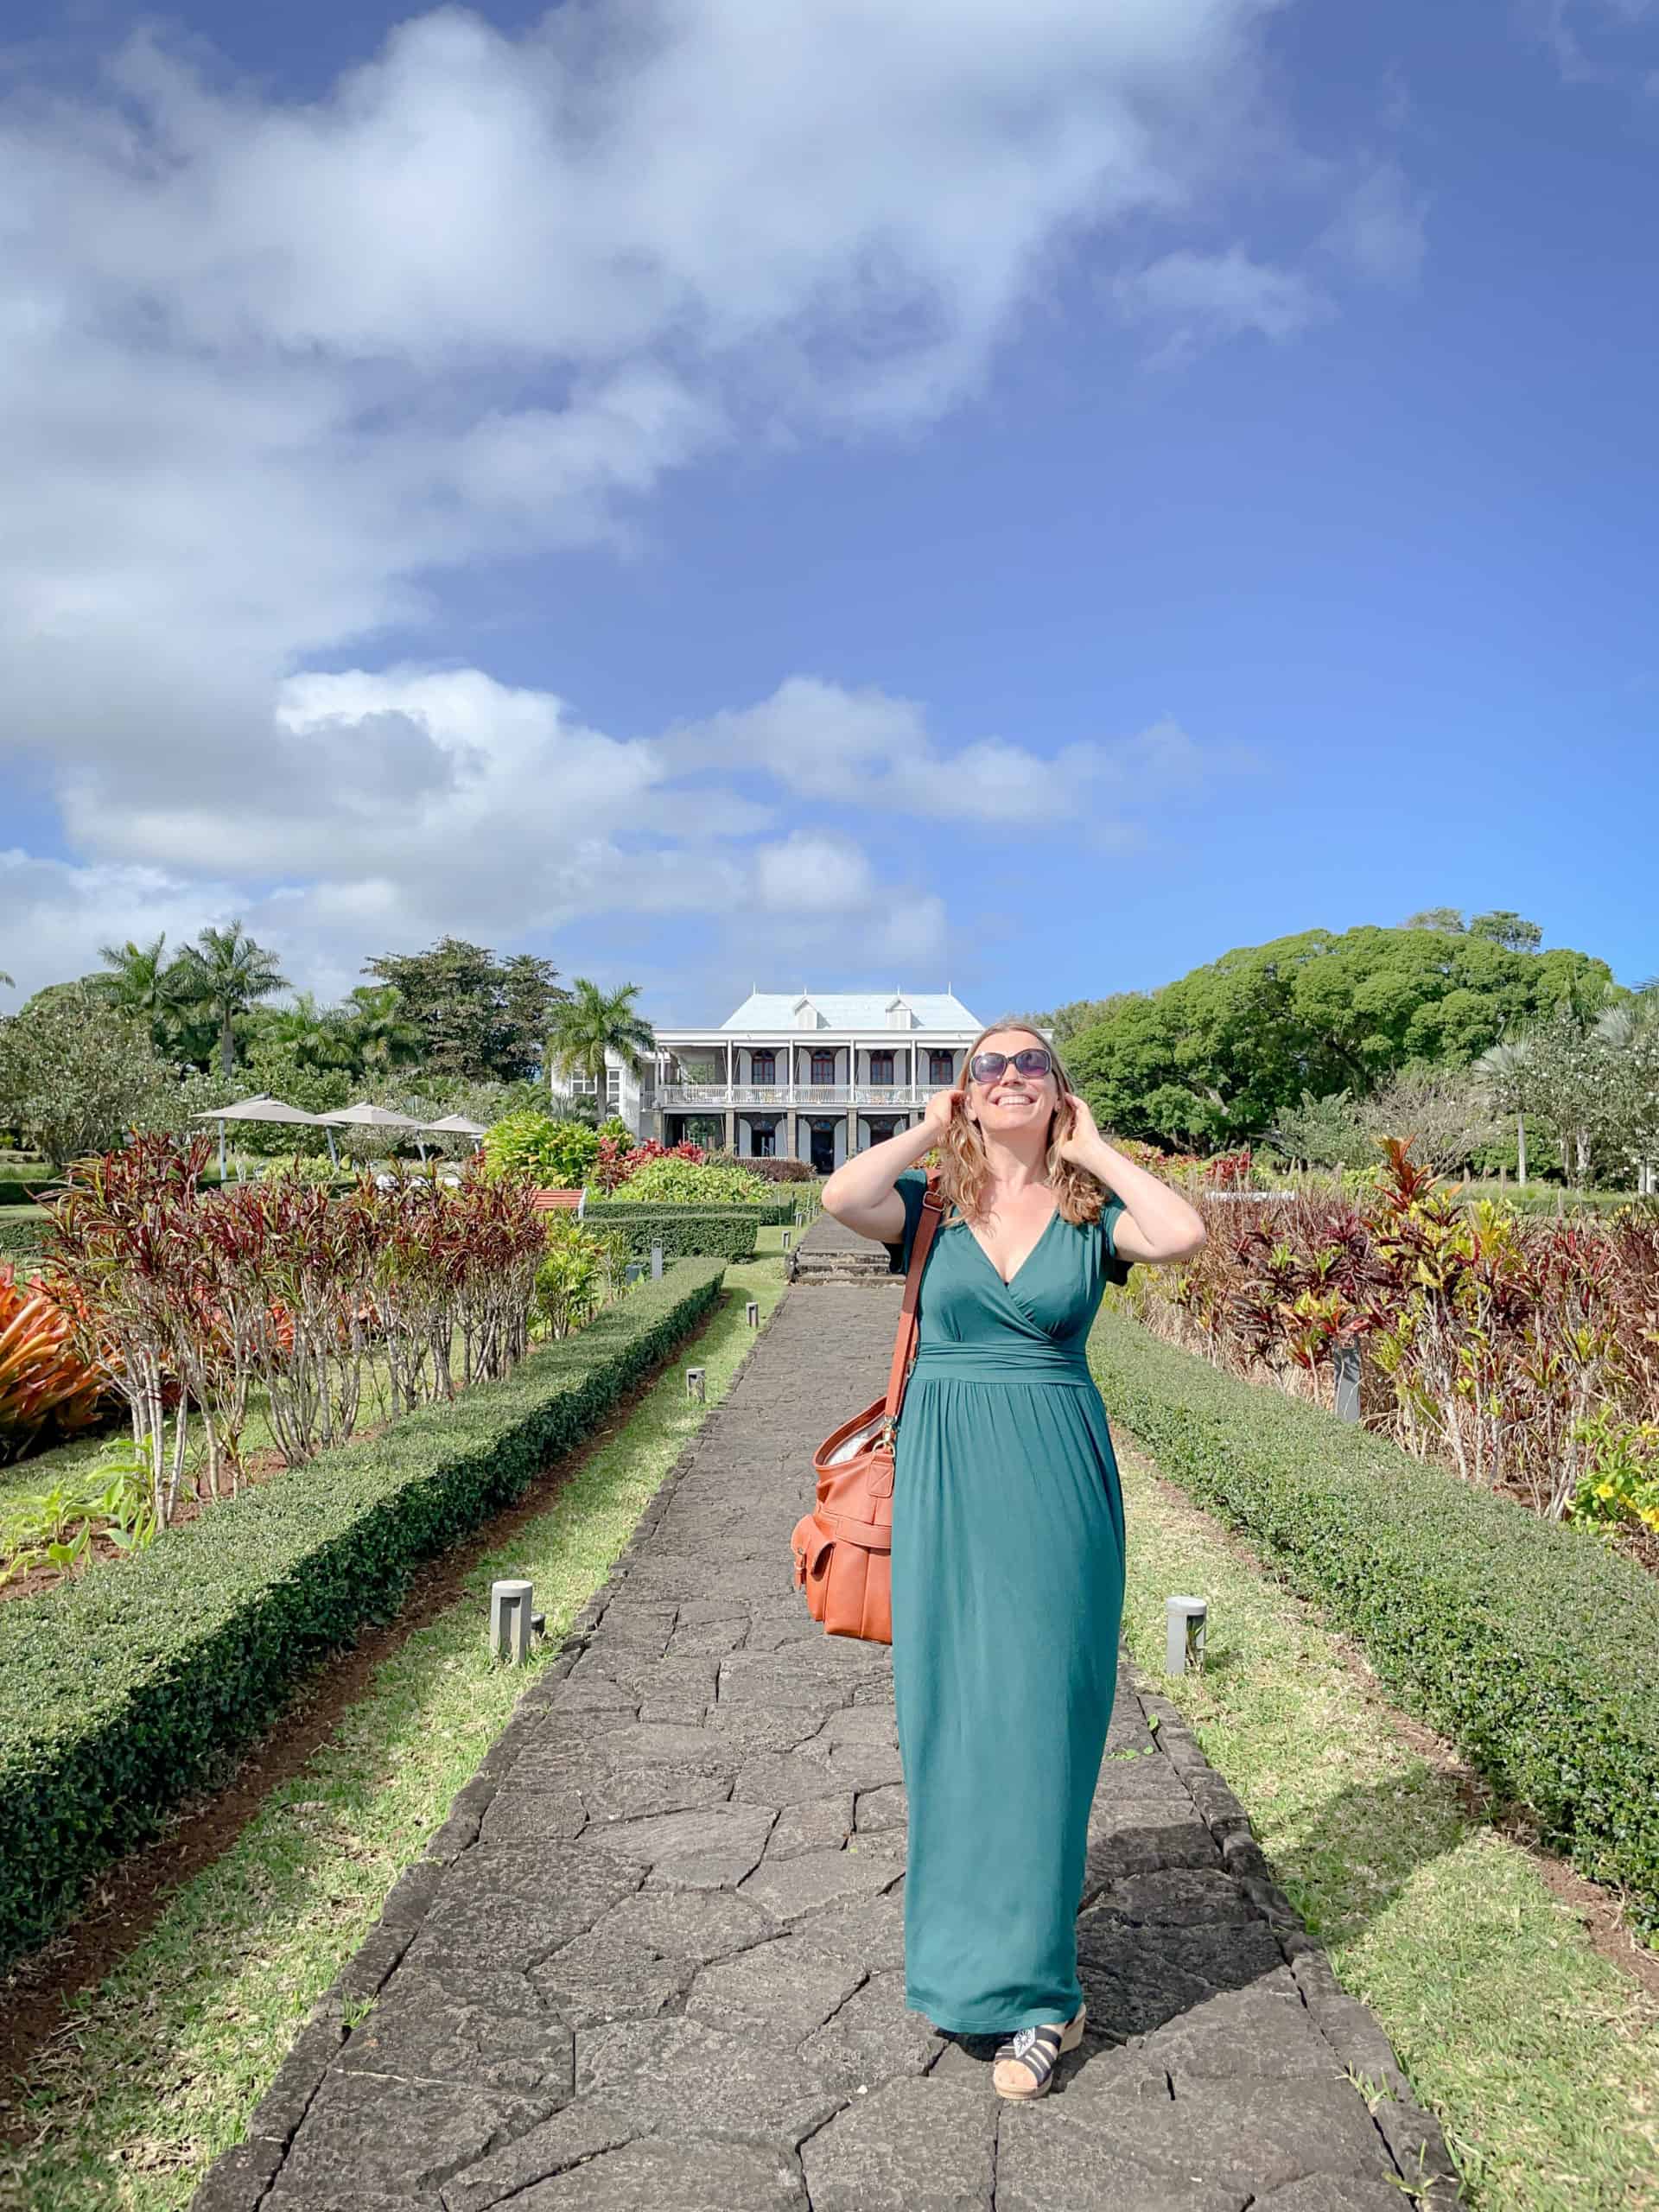 Mauritius - loving life at Chateau Bel Ombre Heritage Resorts outside